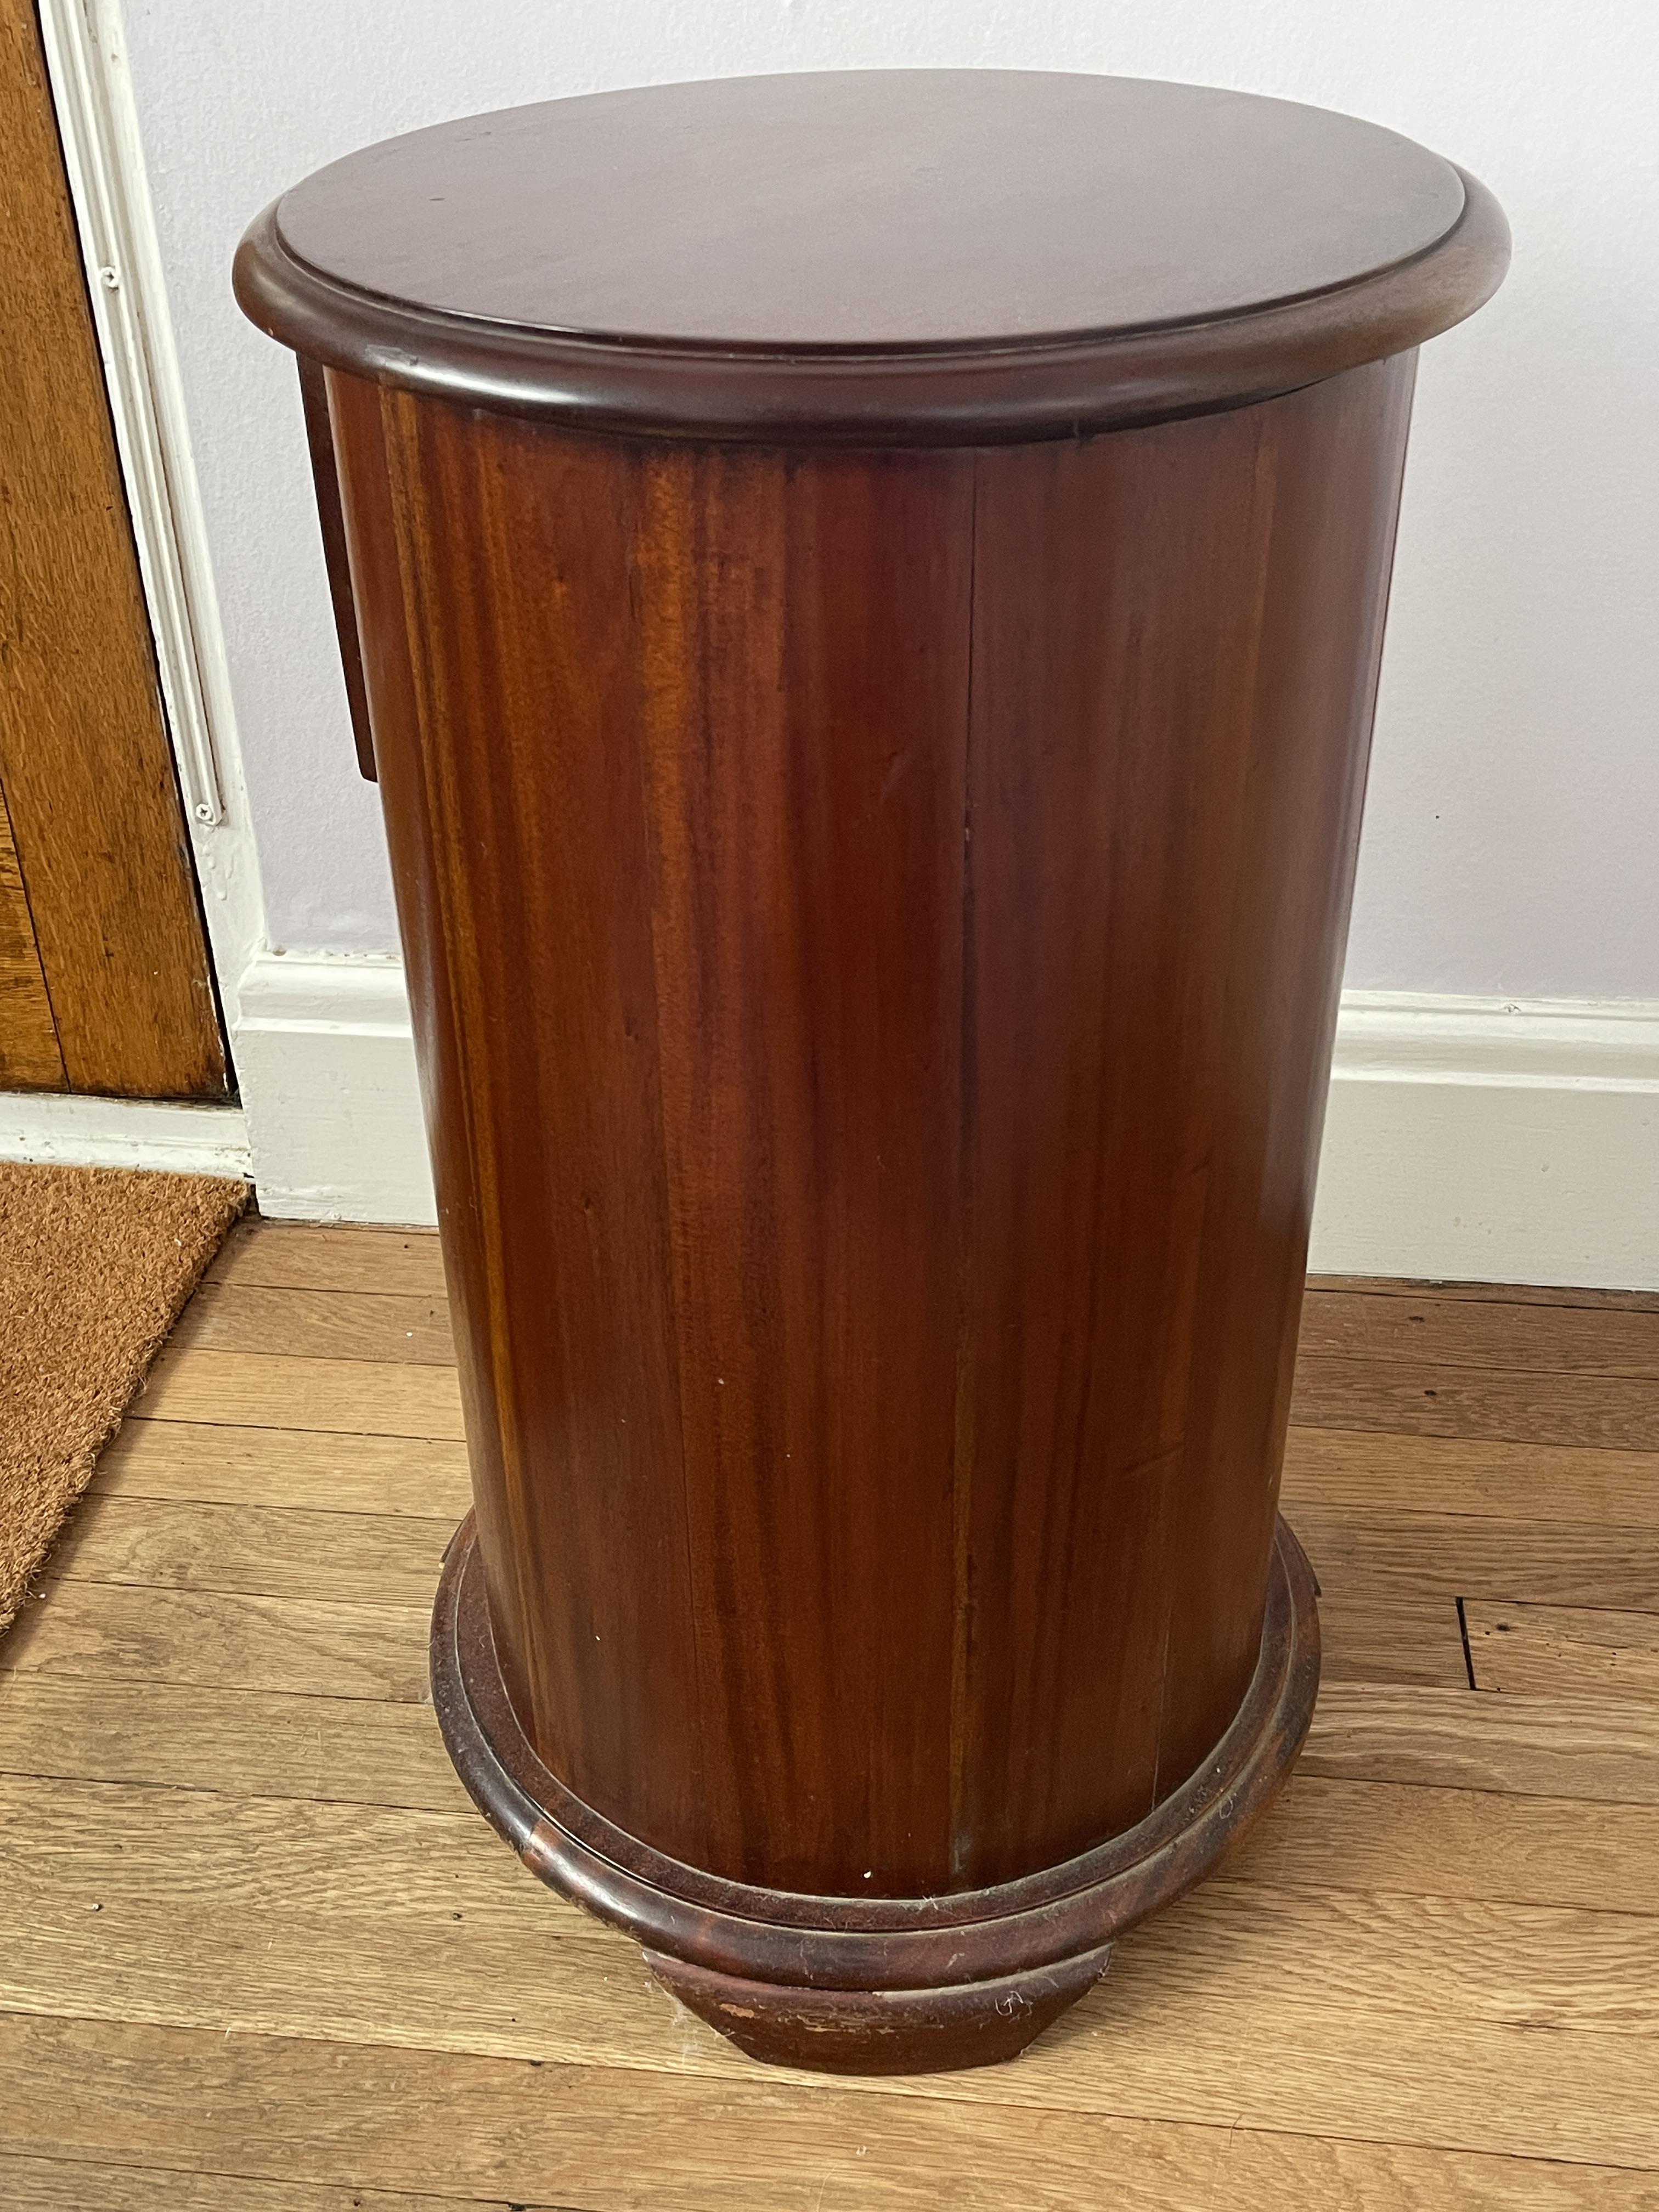 Mahogany Round Drum Chest with Drawer and Cupboard - Image 10 of 14